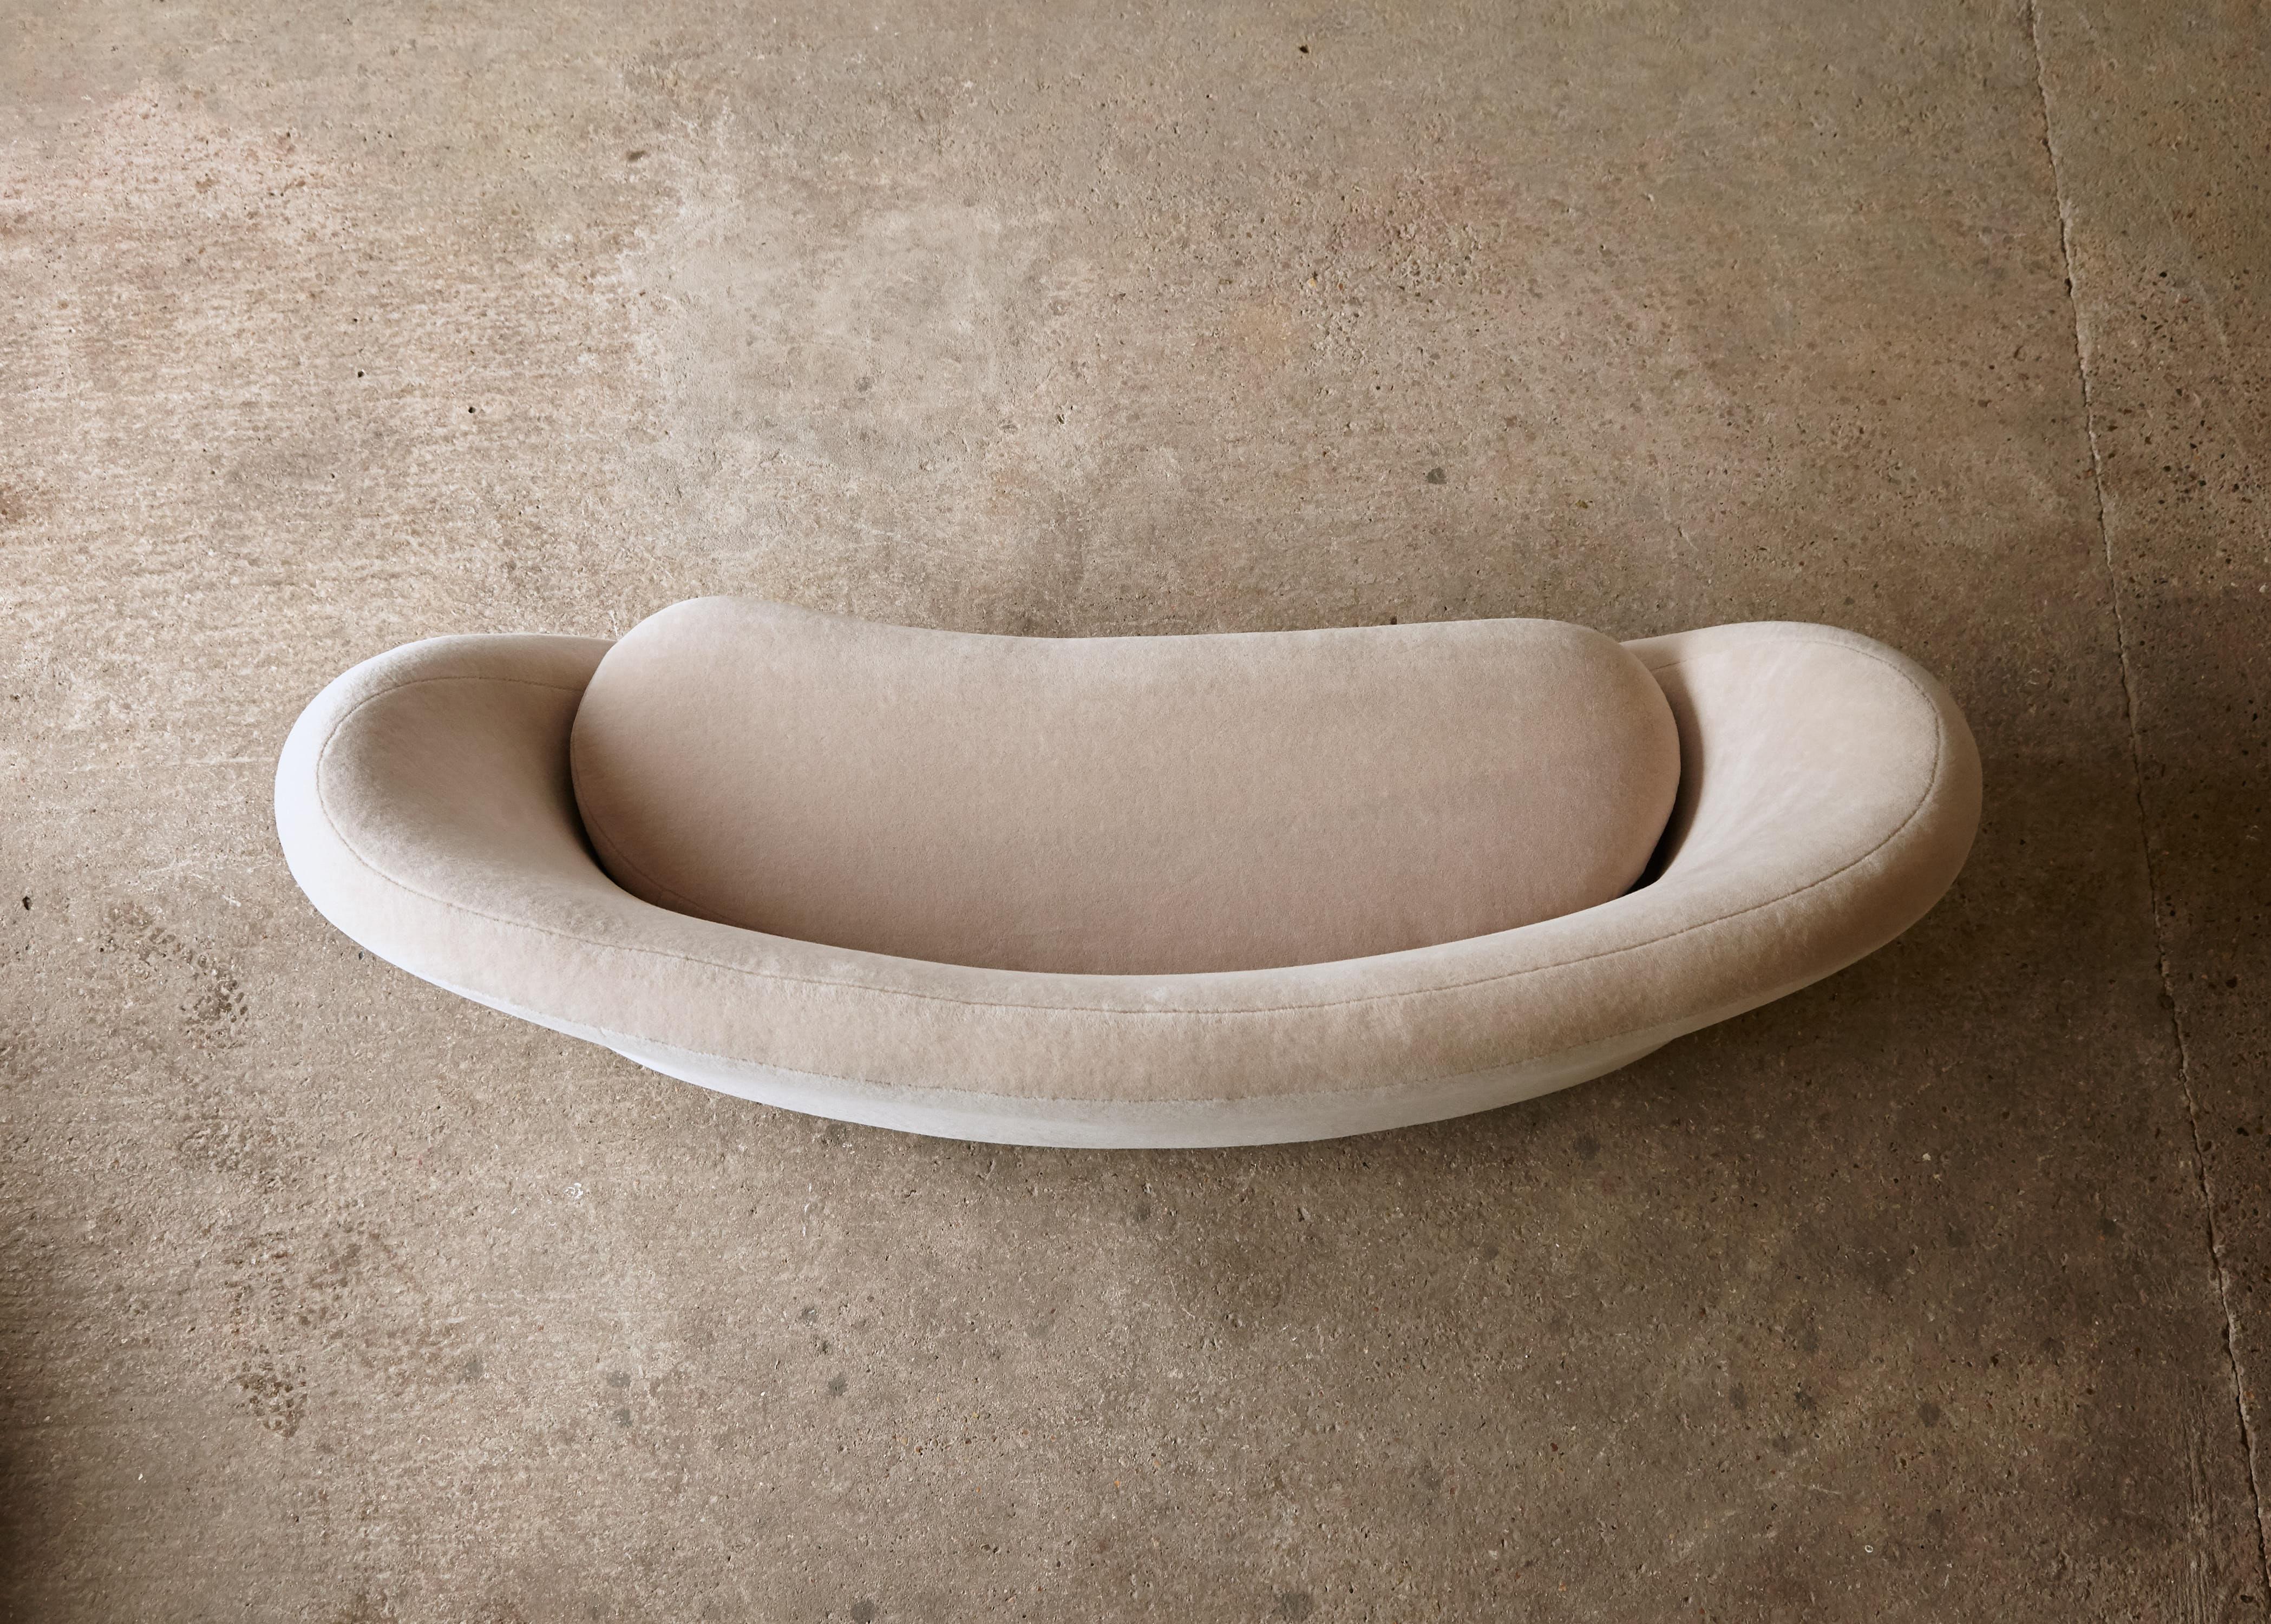 Curved Egg Shape Sofa, in the Style of Ico Parisi, Italy, 1950s / 60s For Sale 3